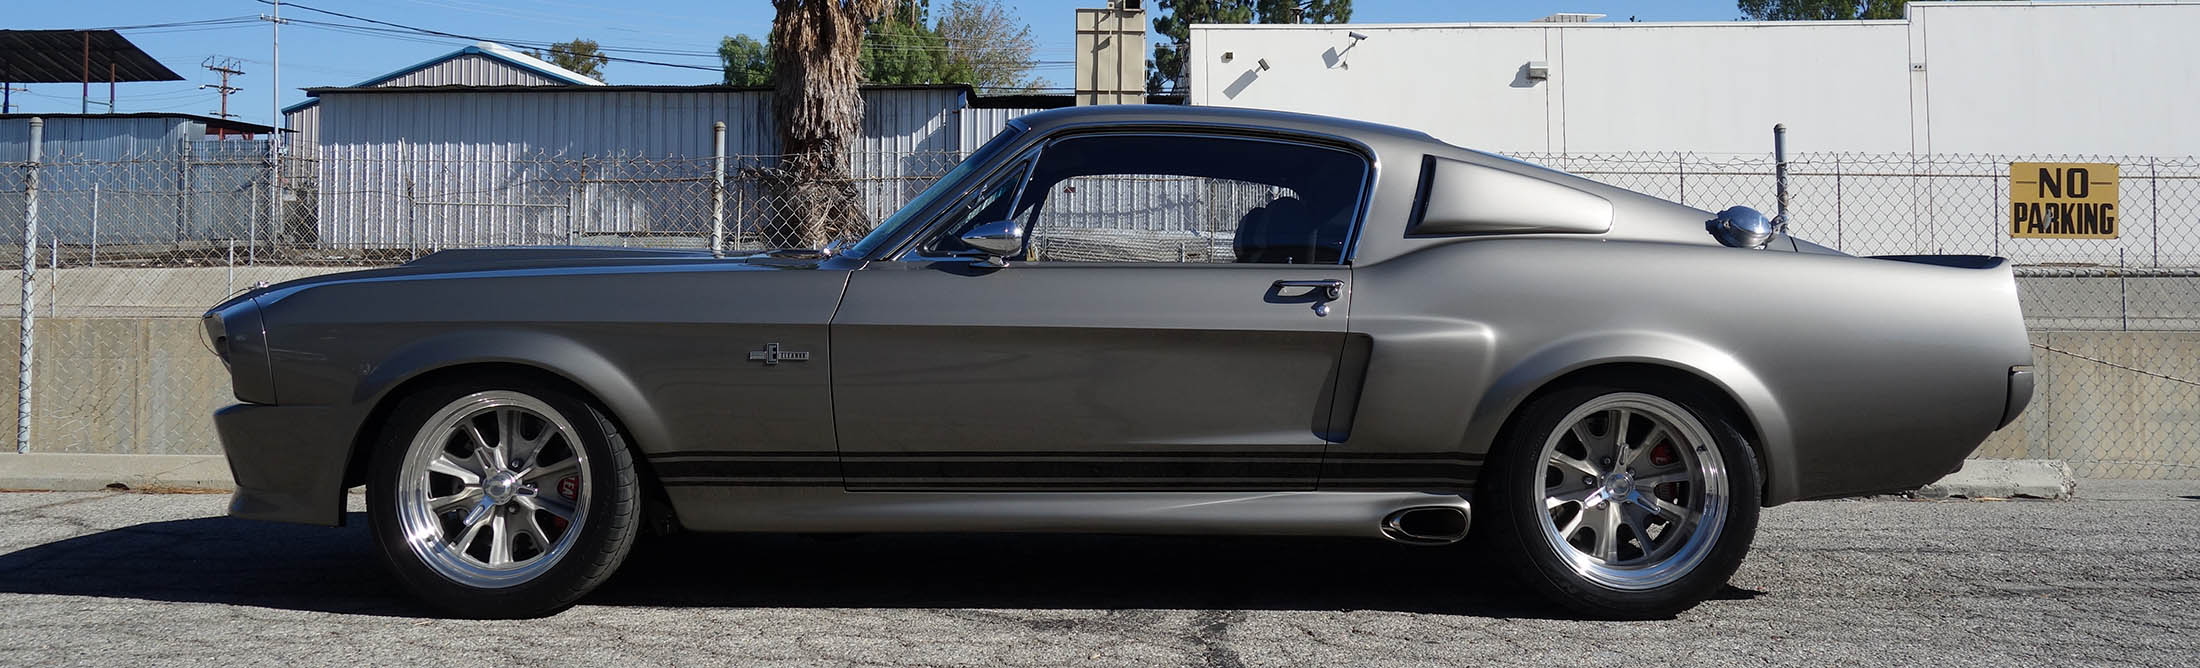 Own a Brand-New 'Eleanor' Mustang From Gone in 60 Seconds for